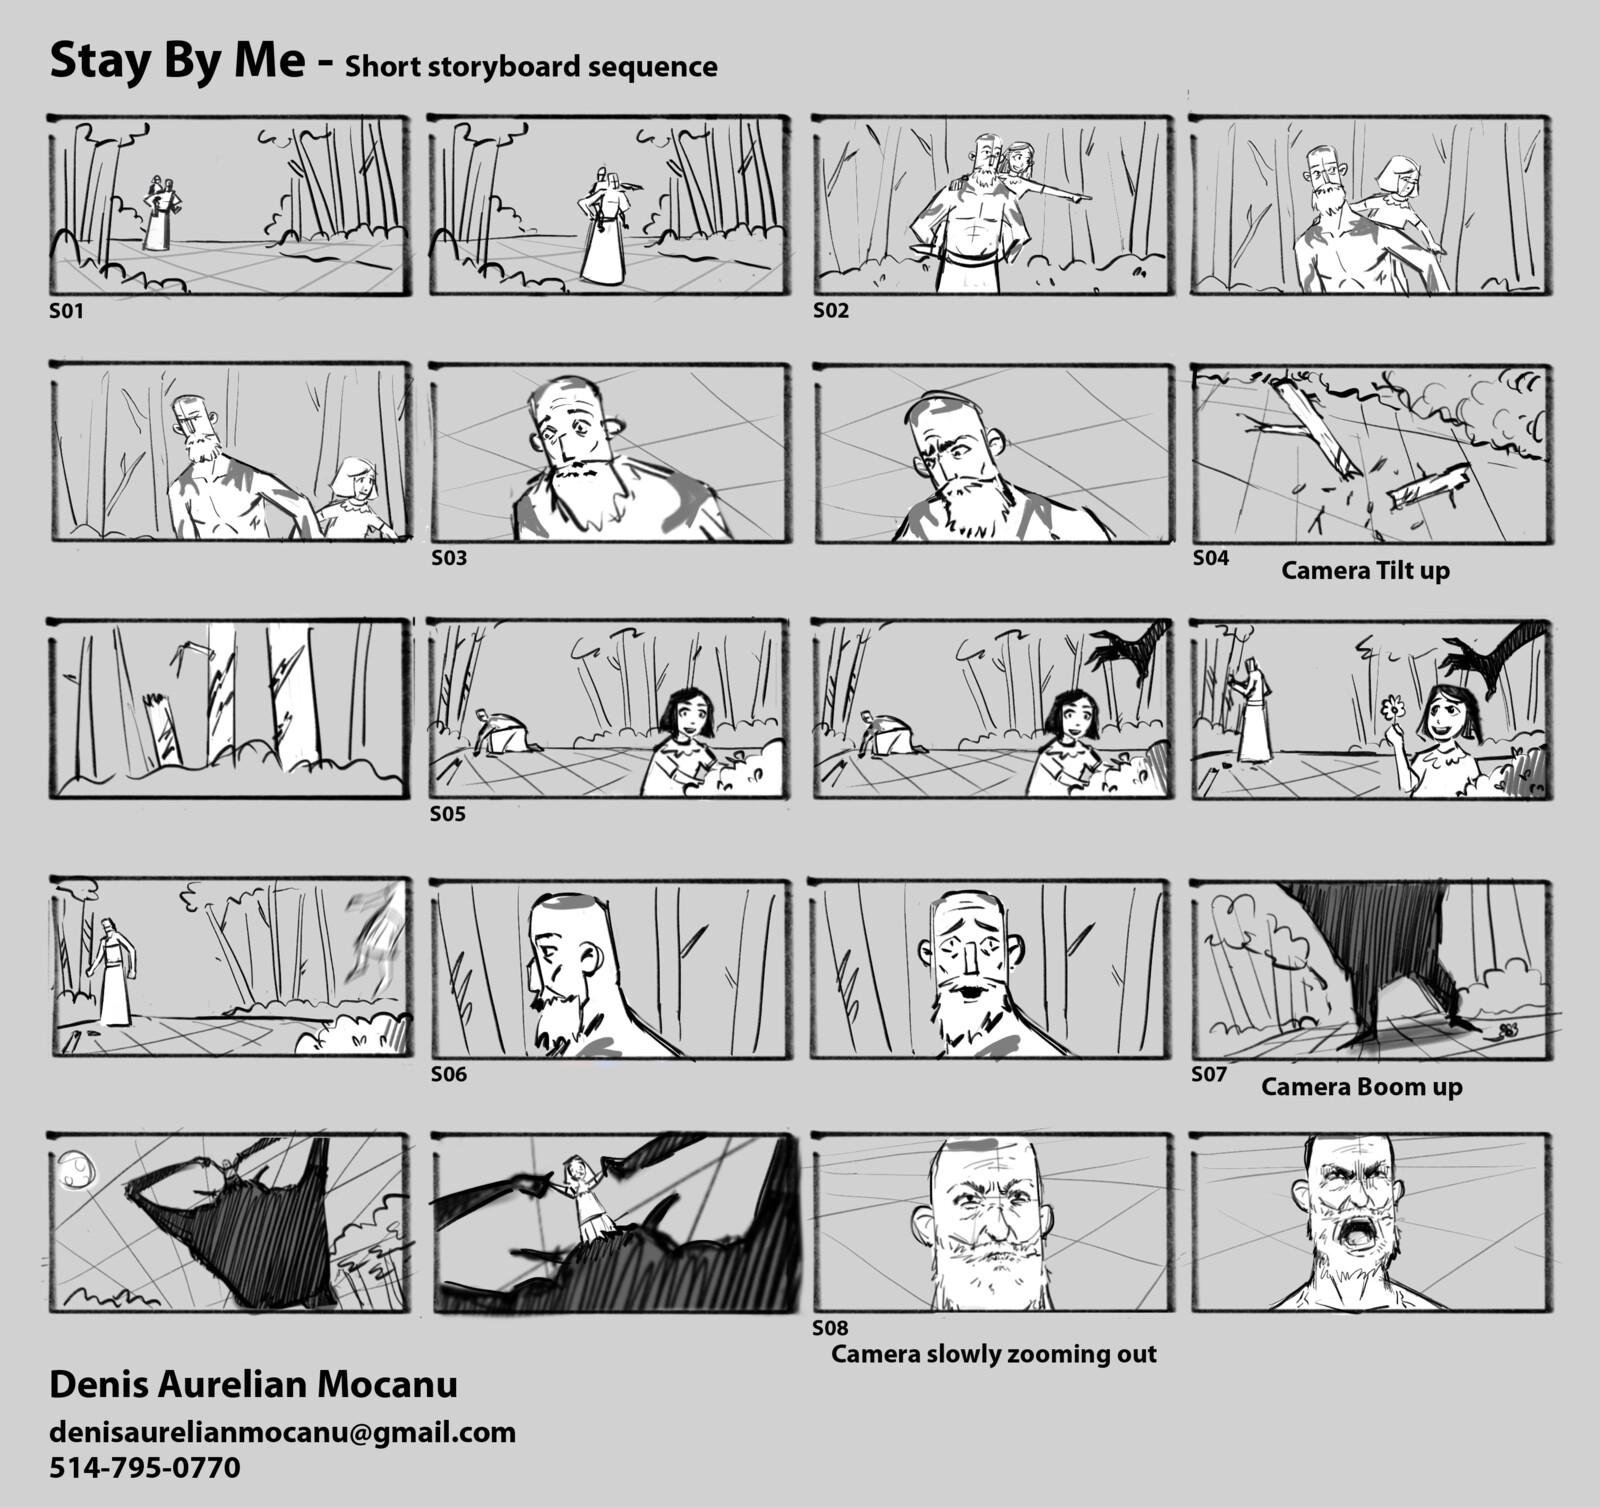 Stay by me - Storyboard